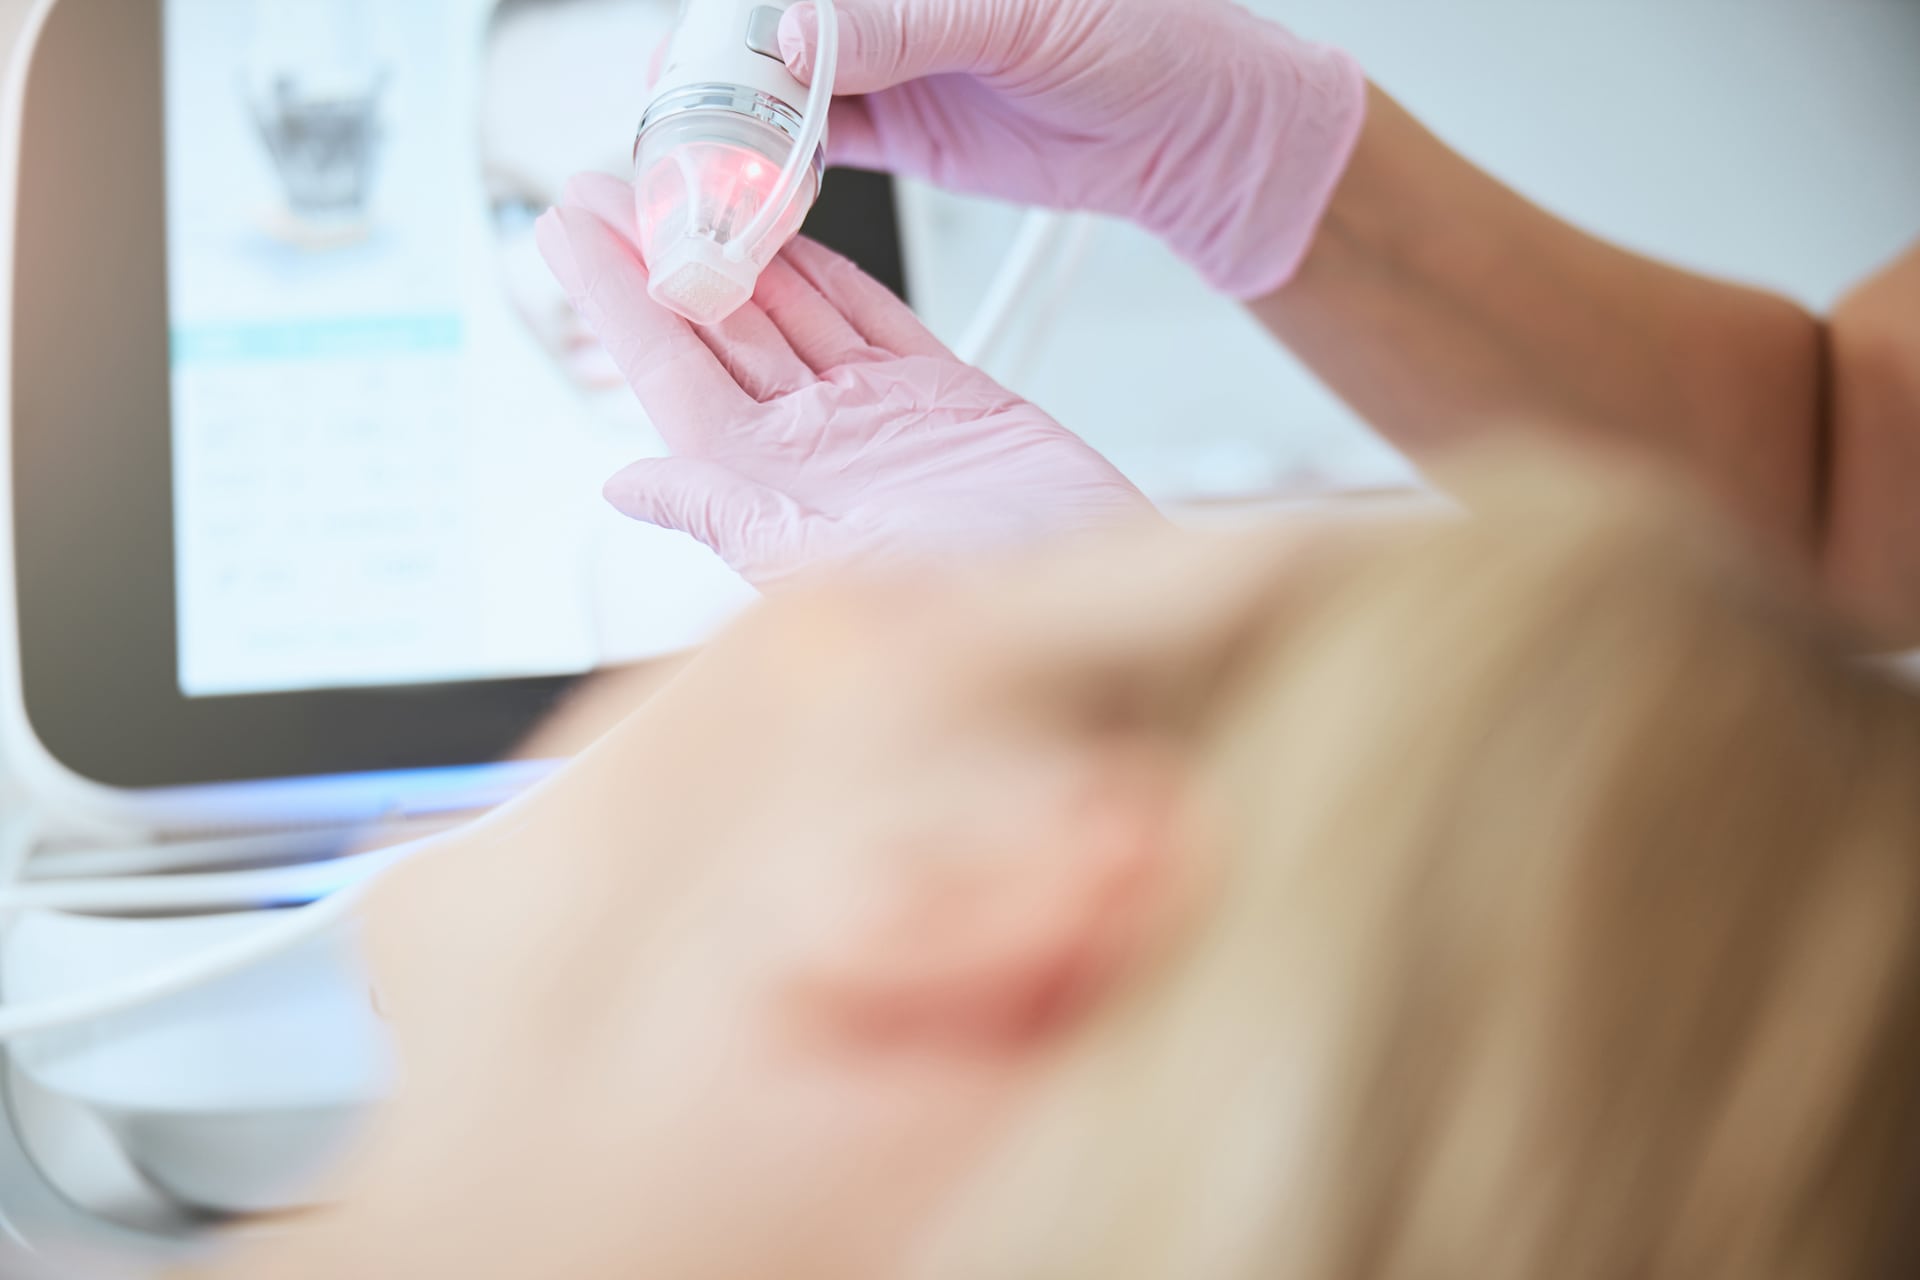 Microneedling | A close-up image of someone applying numbing cream to their hands.